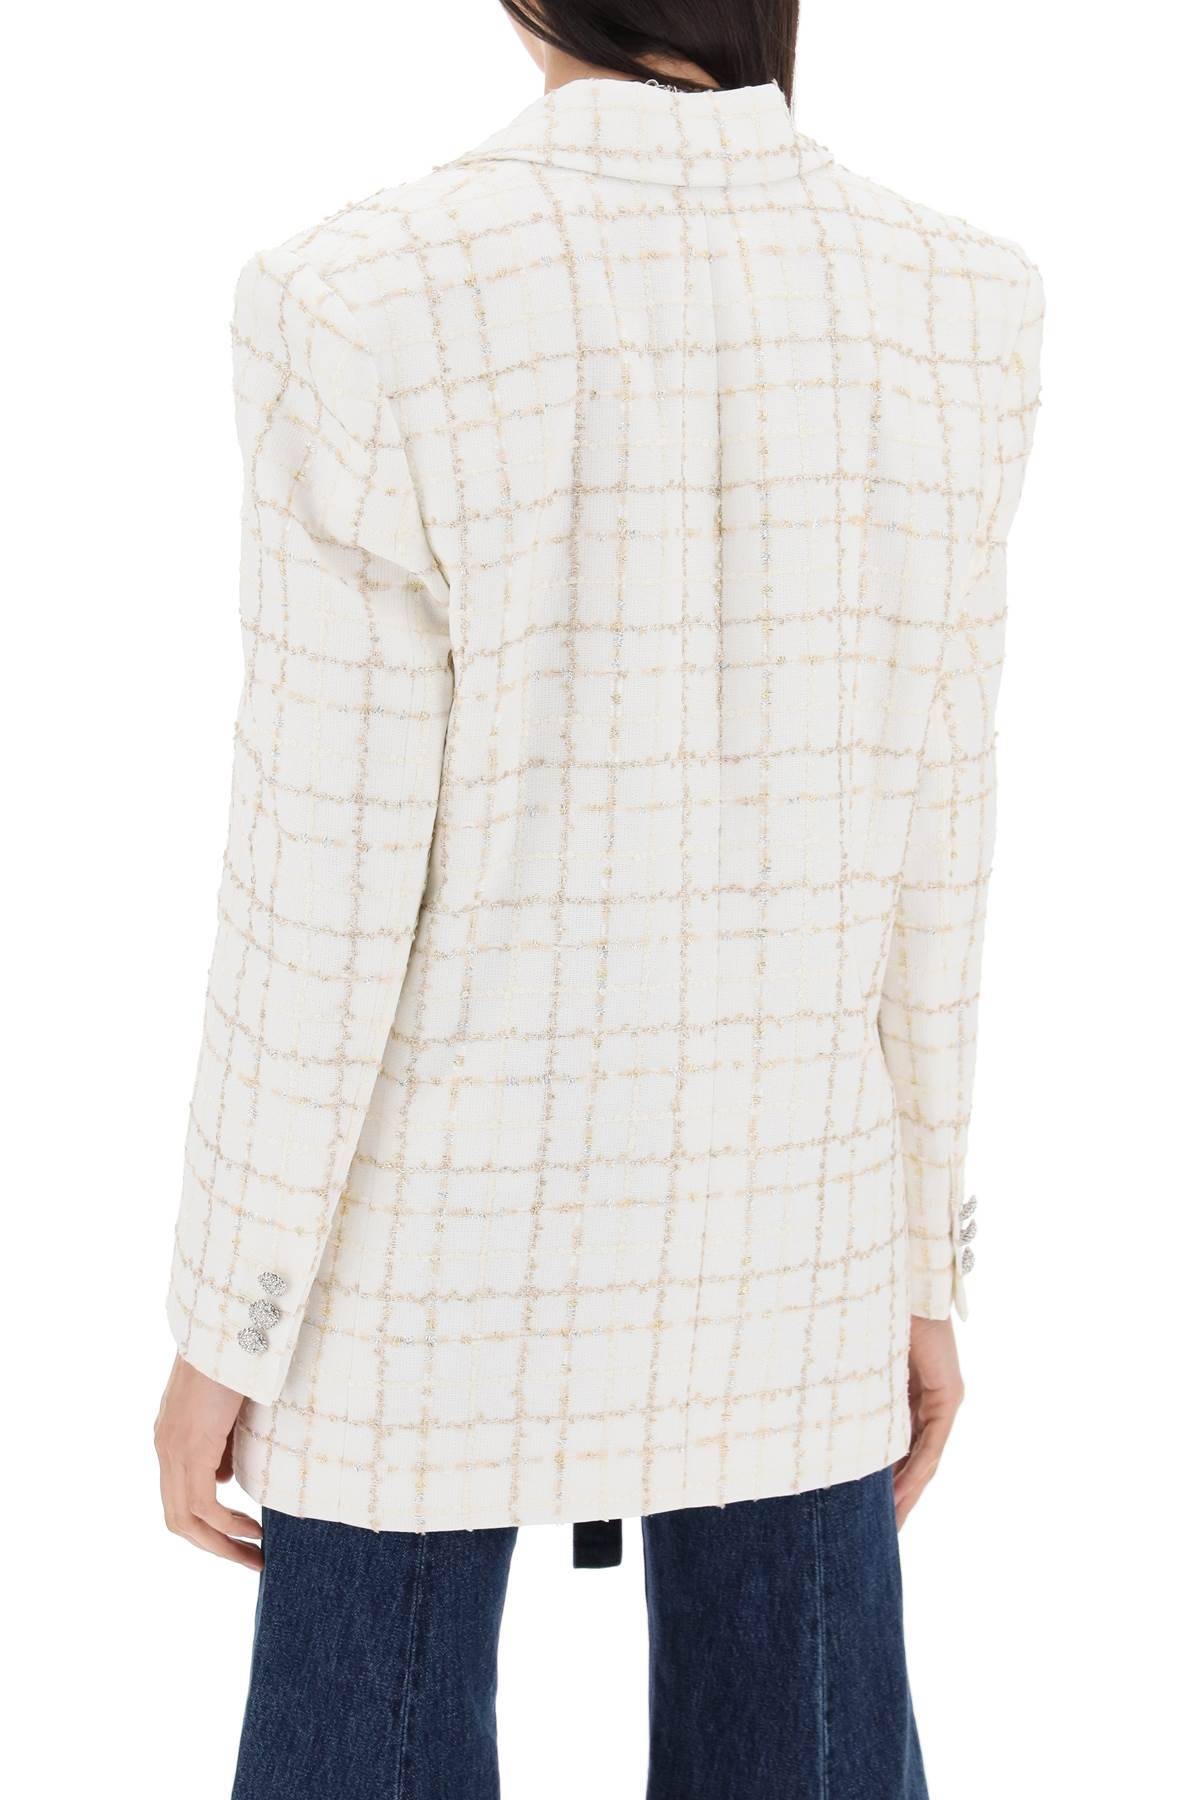 Alessandra Rich Oversized Tweed Jacket With Plaid Pattern - 4